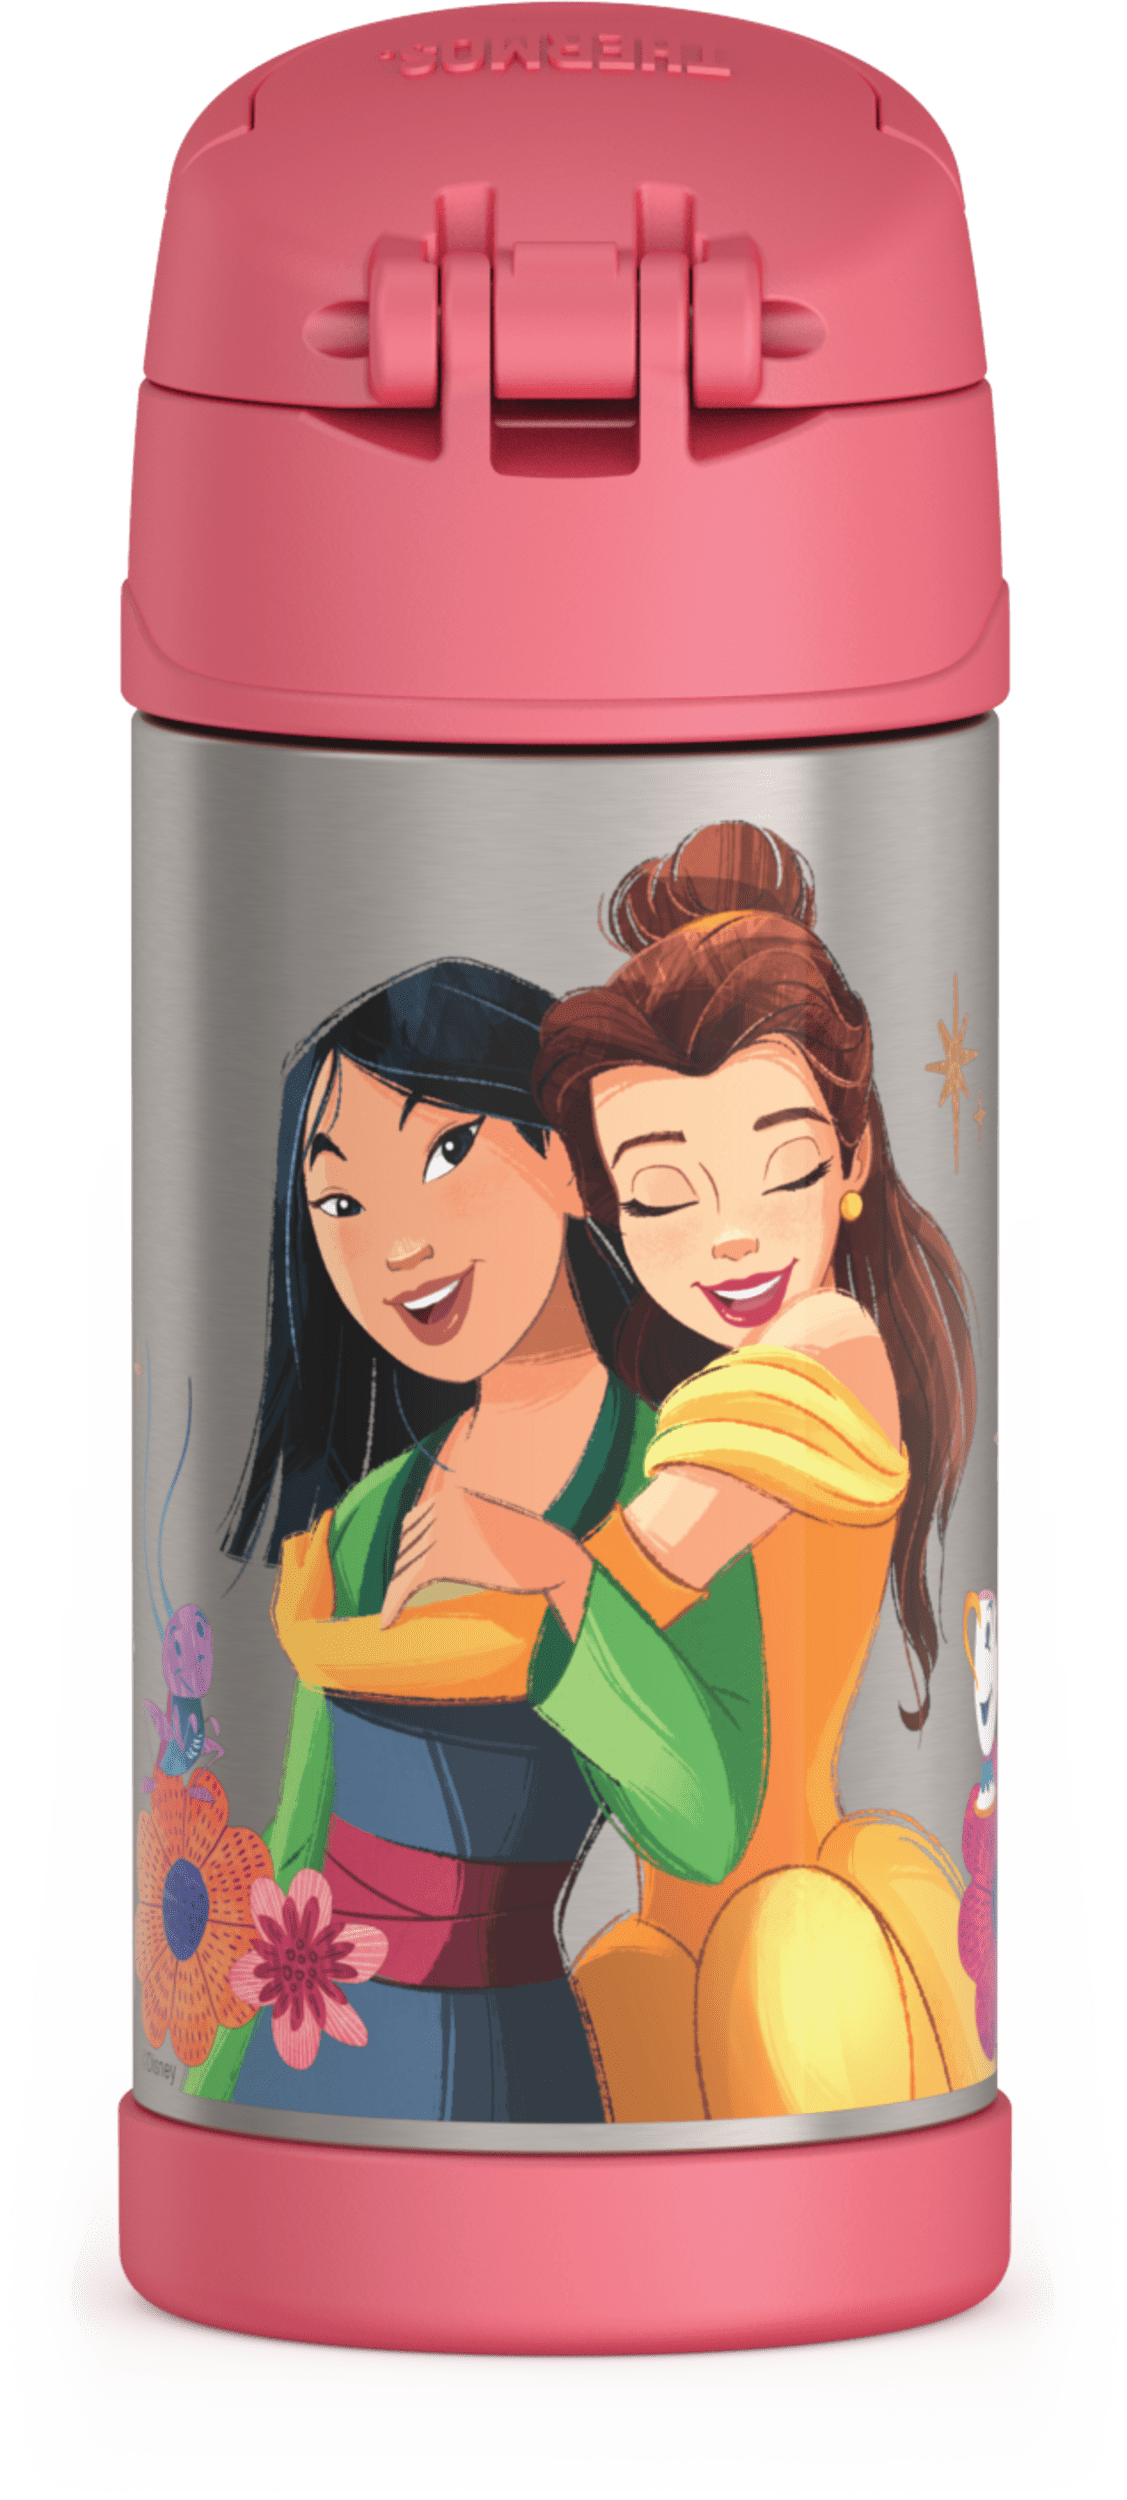 Save 33% on the Pokémon Thermos Funtainer Insulated Bottle at a